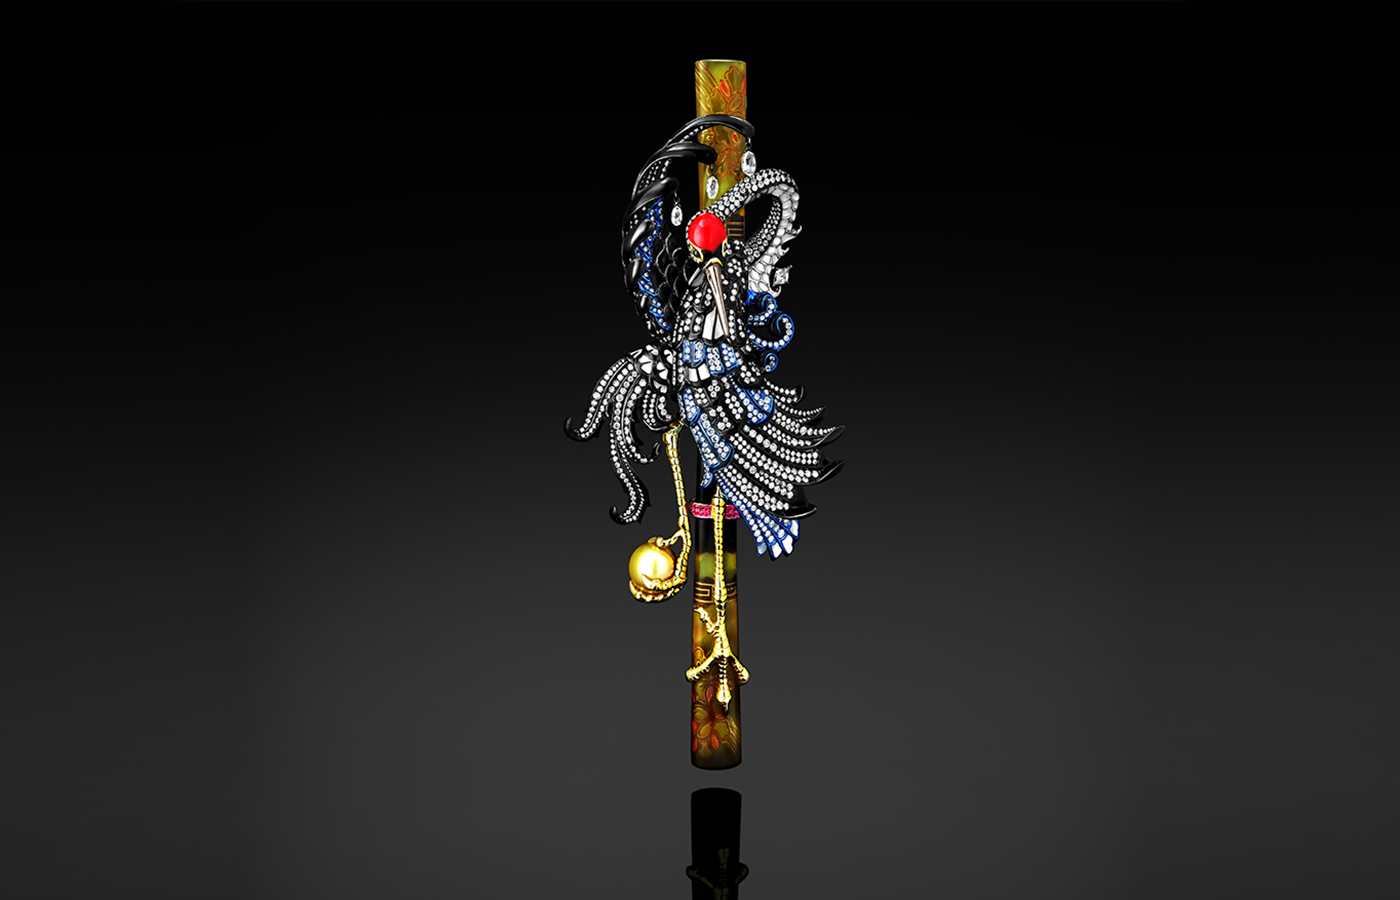 Austy Lee ‘The Tsuruhime Sen no Odori’ brooch/hairpin from The Ancient Fetus collection in 18k yellow gold with antique Meiji lacquerware hairpin, South Sea golden pearl, rubies, blue sapphires, red and black enamel, mop, onyx, fancy colour diamonds and white diamonds